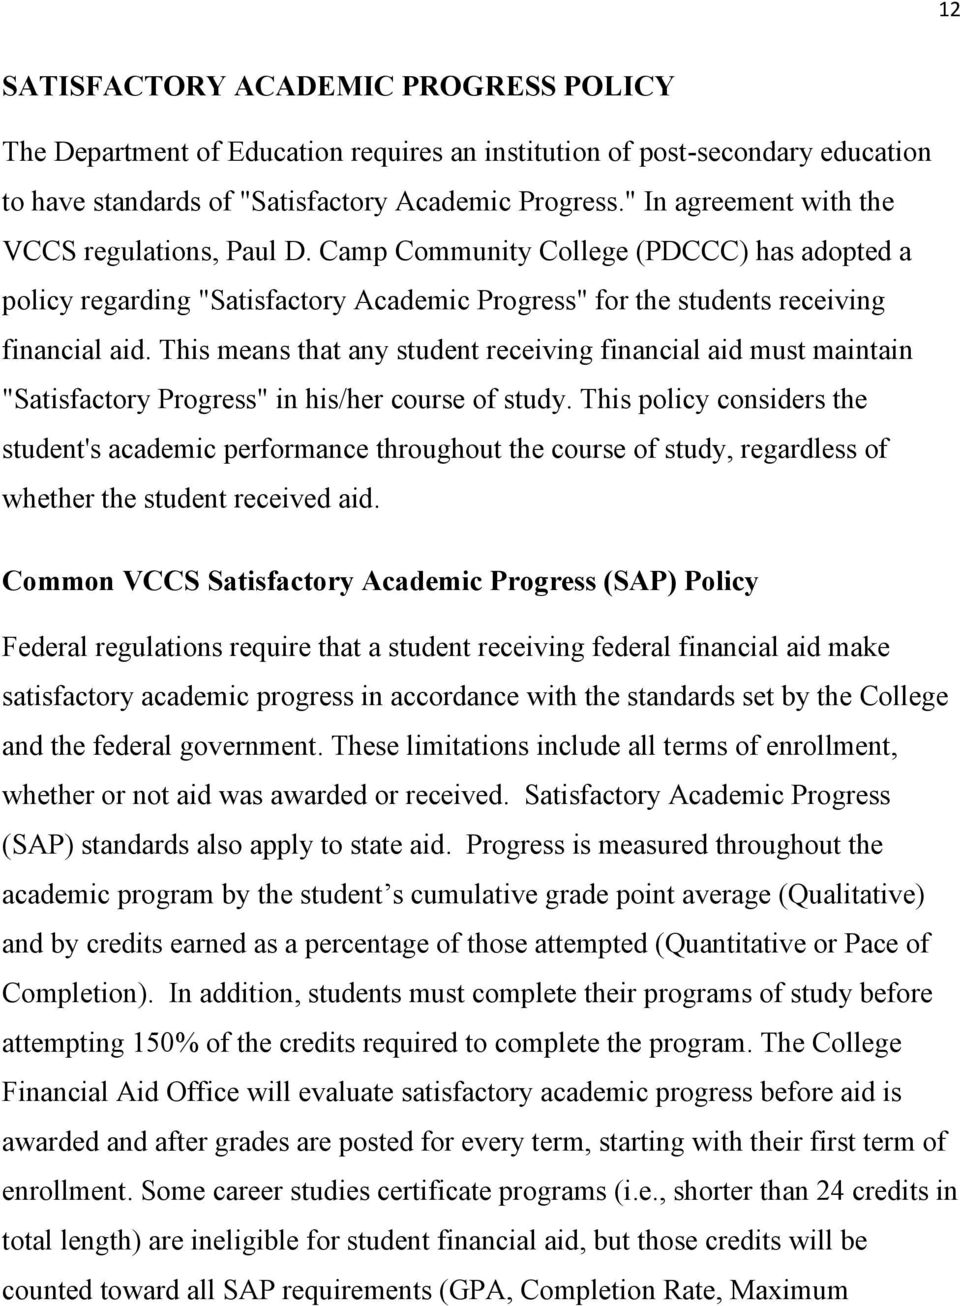 This means that any student receiving financial aid must maintain "Satisfactory Progress" in his/her course of study.